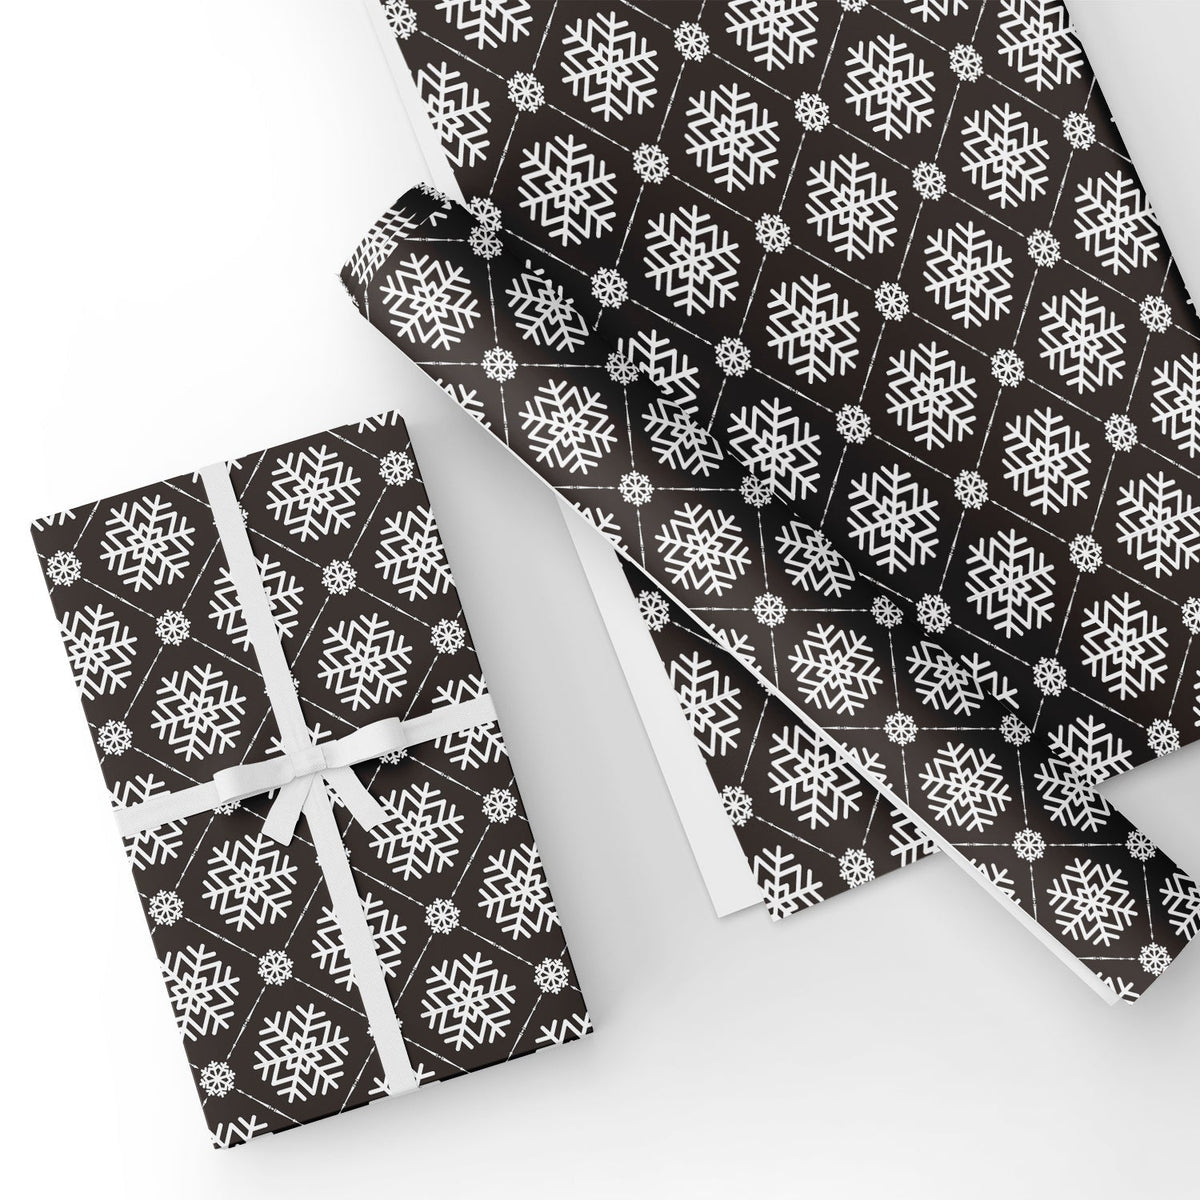 Personalized Flat Wrapping Paper for Birthday, Holiday, Christmas - HO  Black Letters Gift Wrap on White – WrapaholicGifts